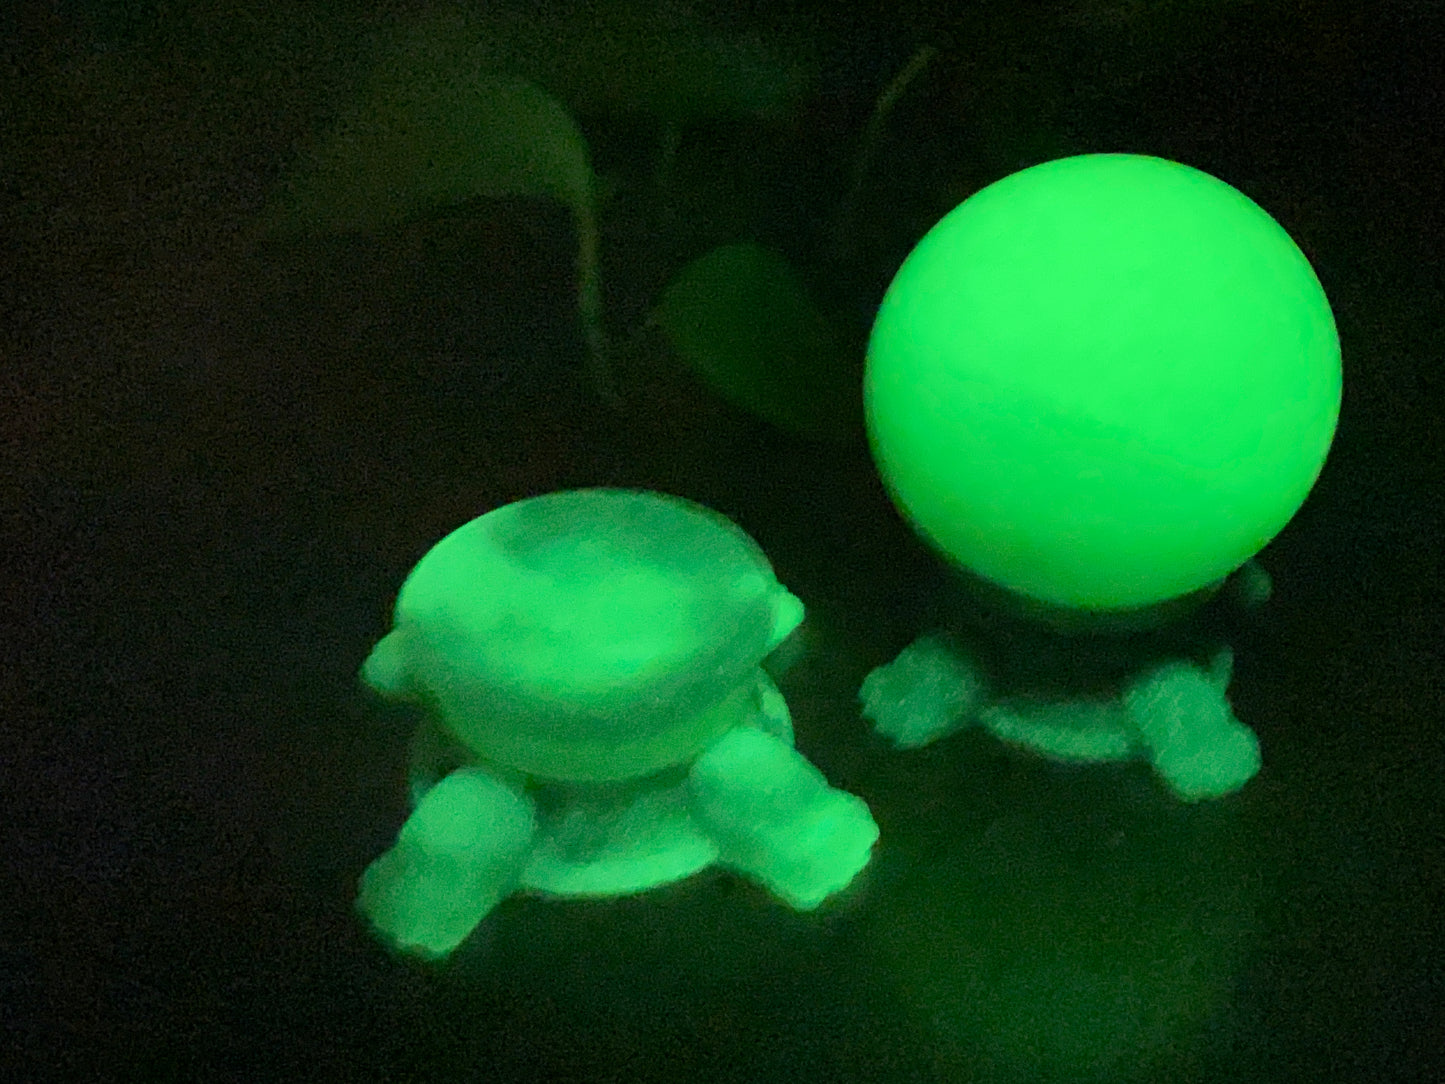 a glowing green toy next to a glowing green ball